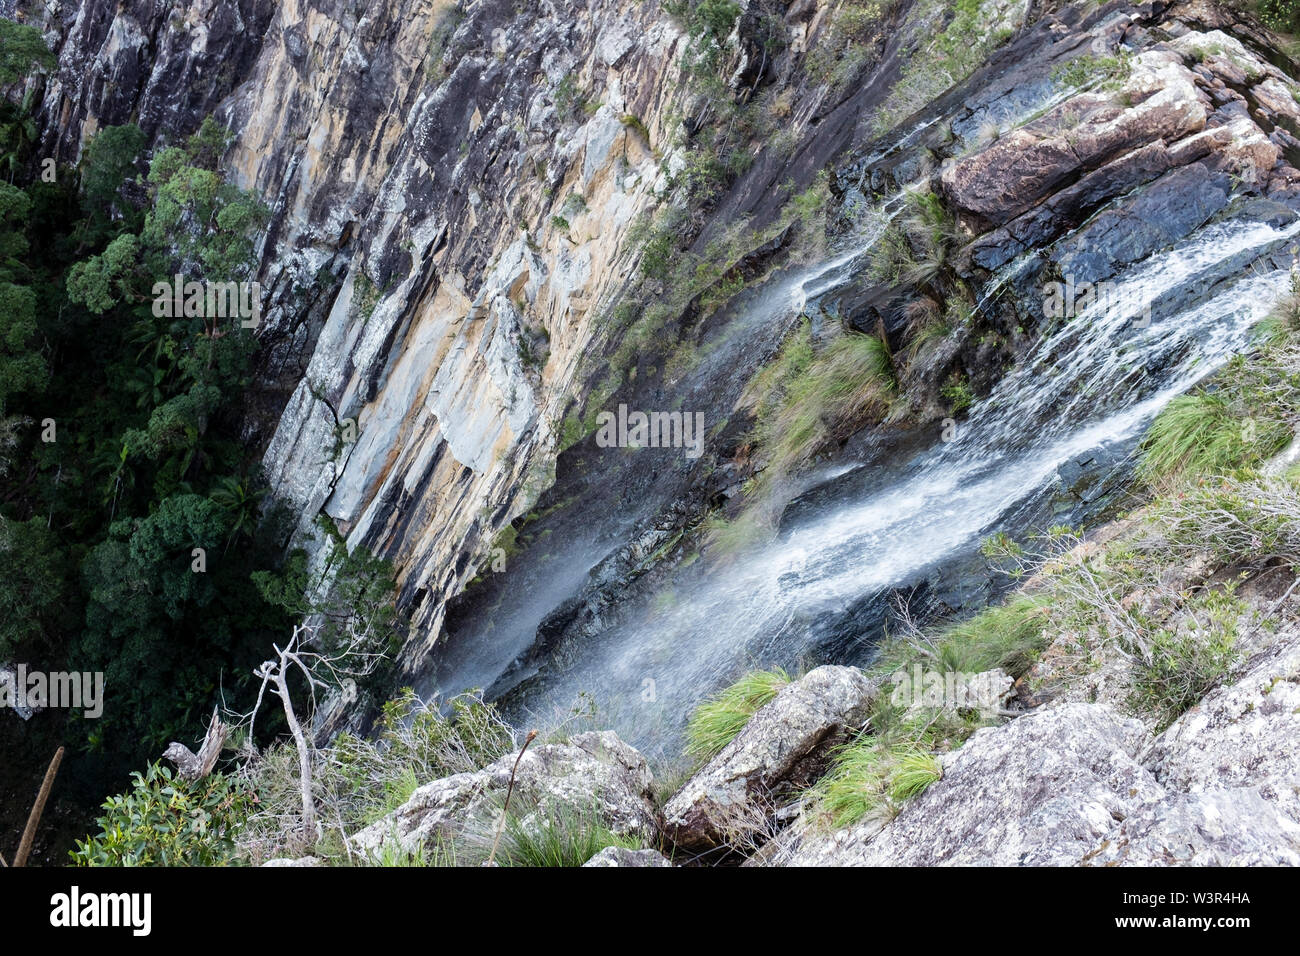 Minyon Falls at Nightcap National Park in the Northern Rivers region of New South Wales, Australia Stock Photo